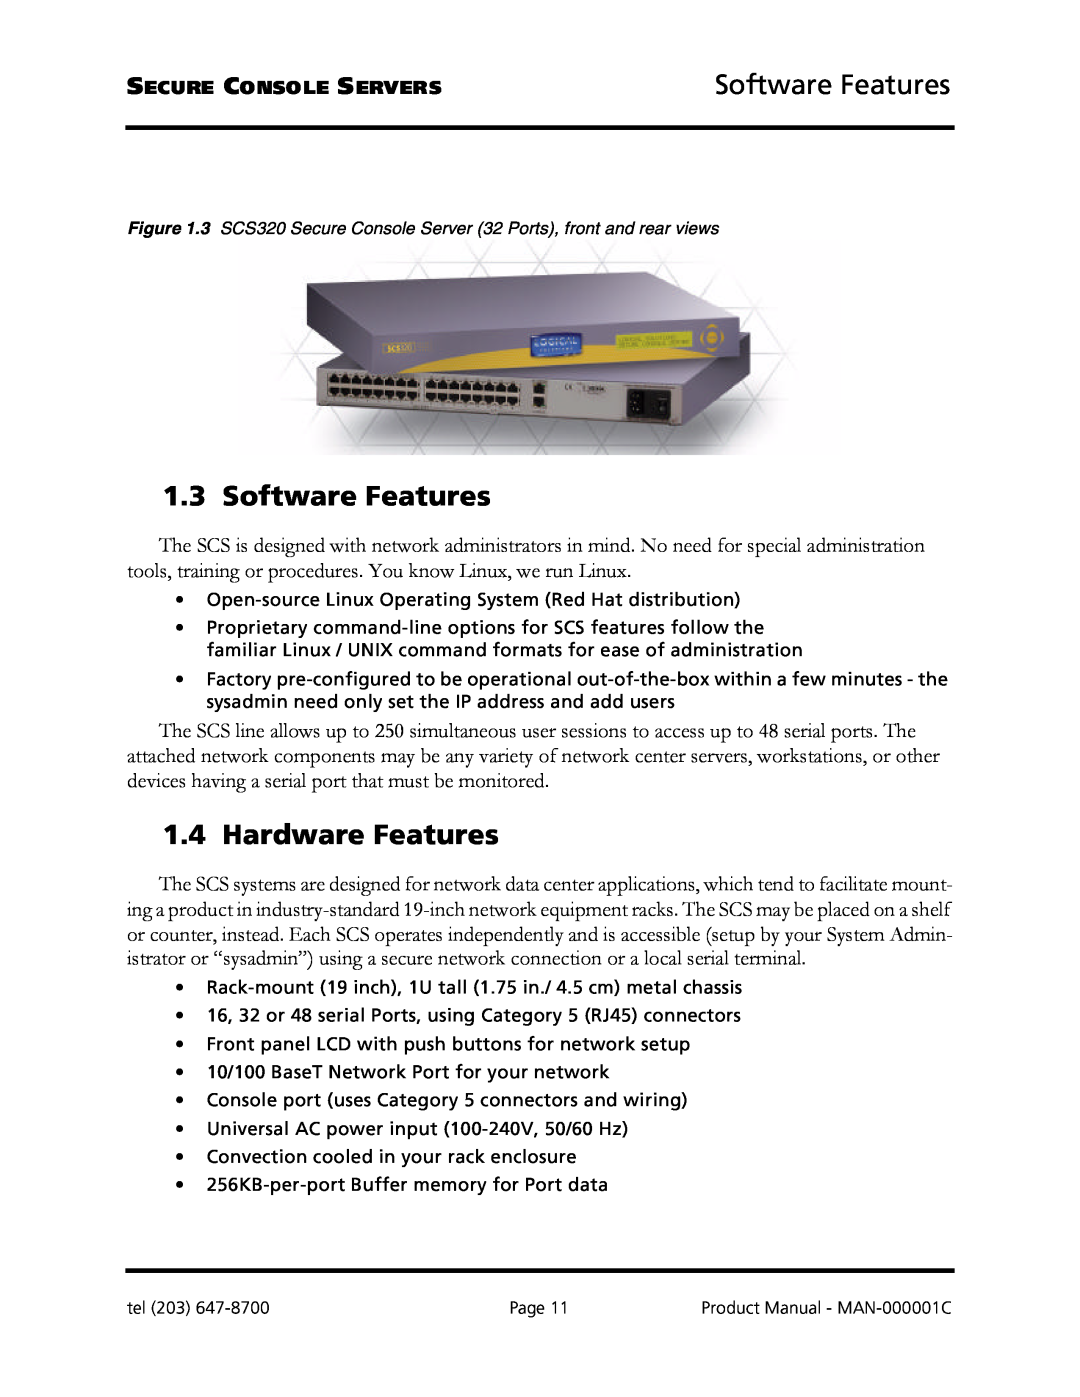 Logical Solutions SCS-R manual Software Features, Hardware Features 